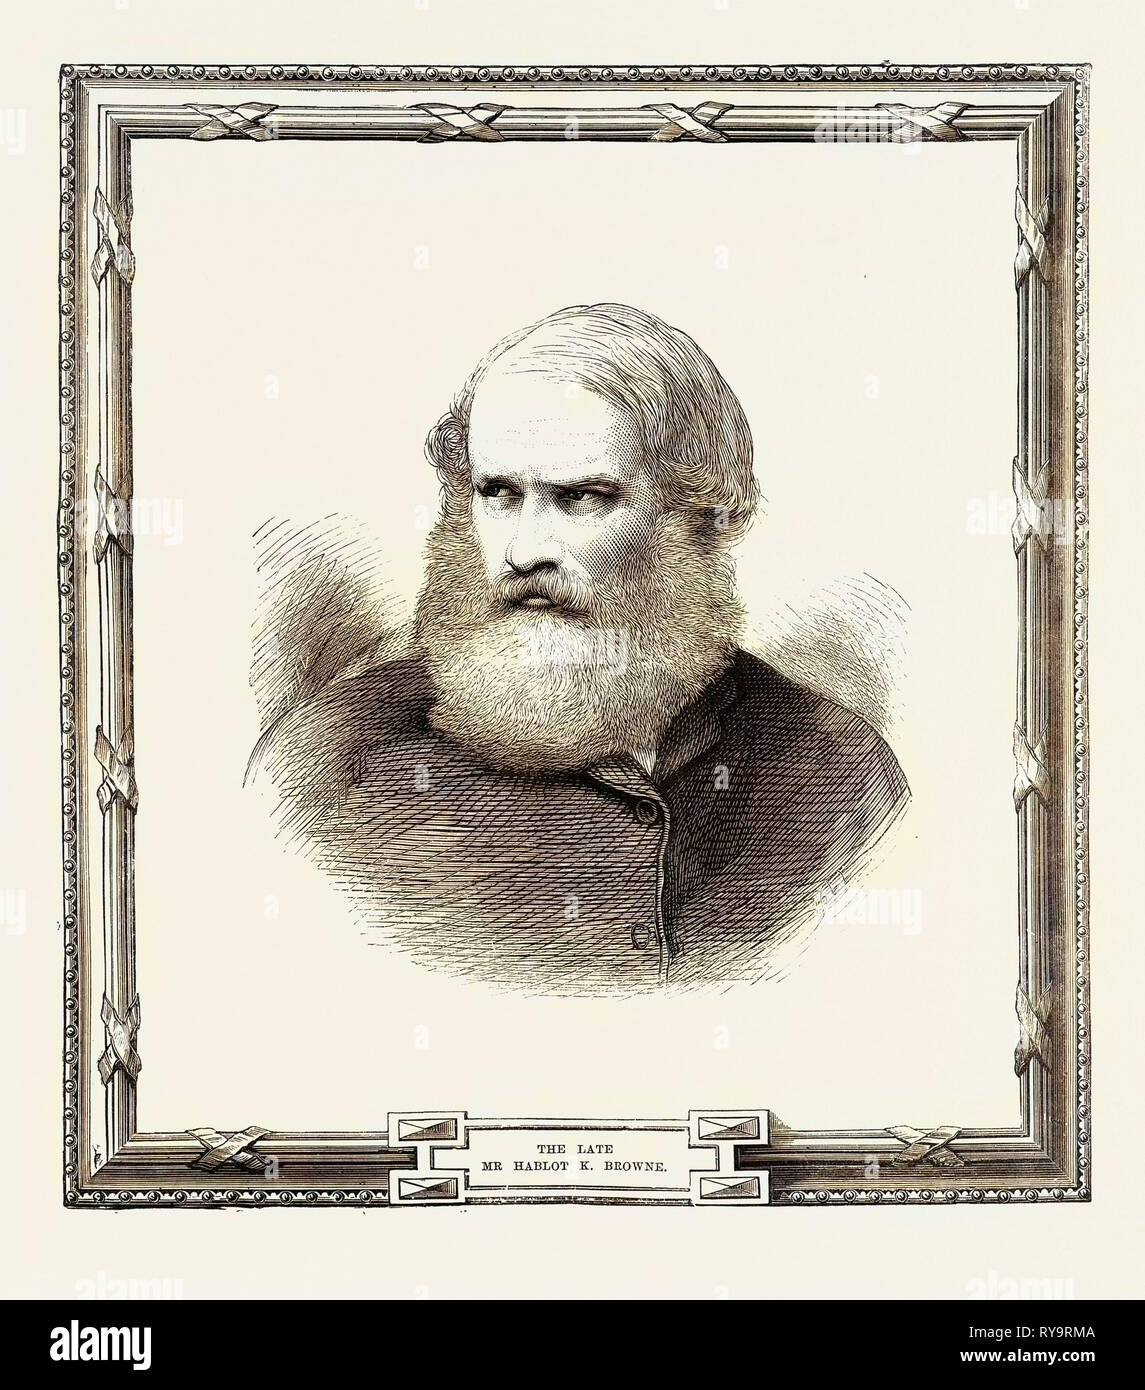 Hablot Knight Browne 12 July 1815 - 8 July 1882 Was an English Artist, Famous As Phiz, Illustrator of Books by Charles Dickens, Charles Lever and Harrison Ainsworth, Engraving 1882, UK, Britain, British, Europe, United Kingdom, Great Britain, European Stock Photo